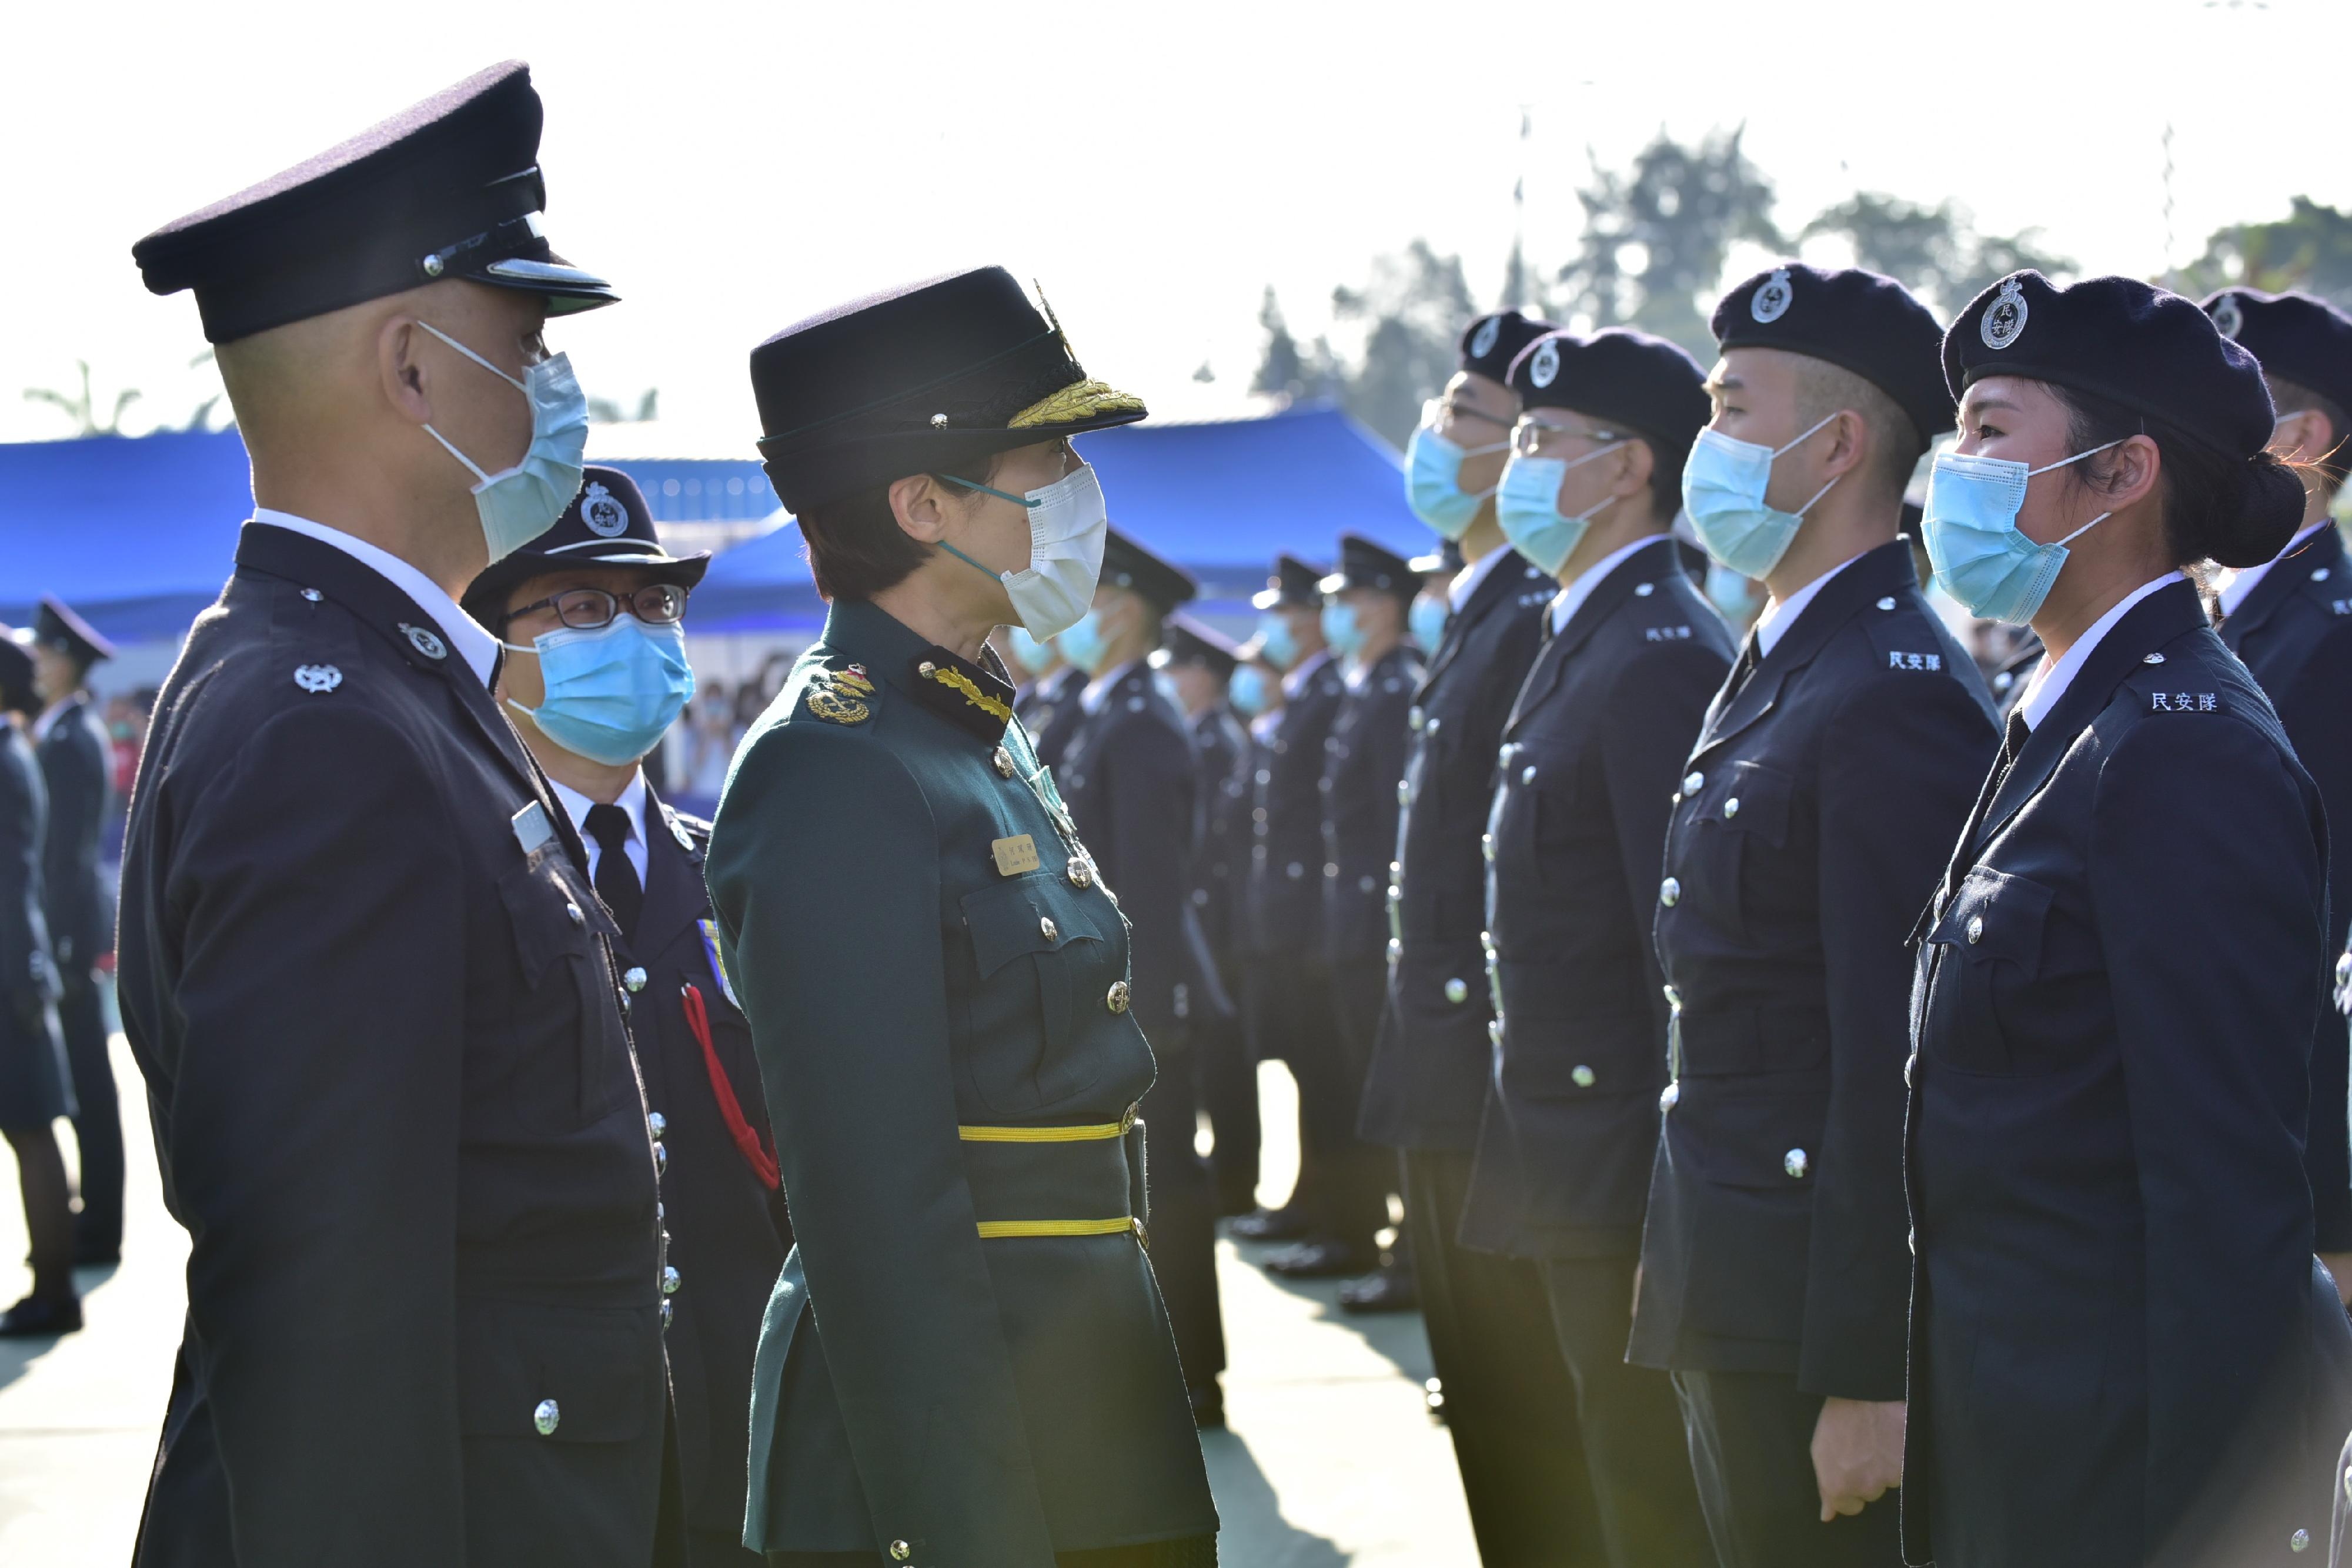 The Civil Aid Service held the 83rd Recruits Passing-out Parade at its headquarters today (December 12). Photo shows the Commissioner of Customs and Excise, Ms Louise Ho (third left), inspecting the parade.